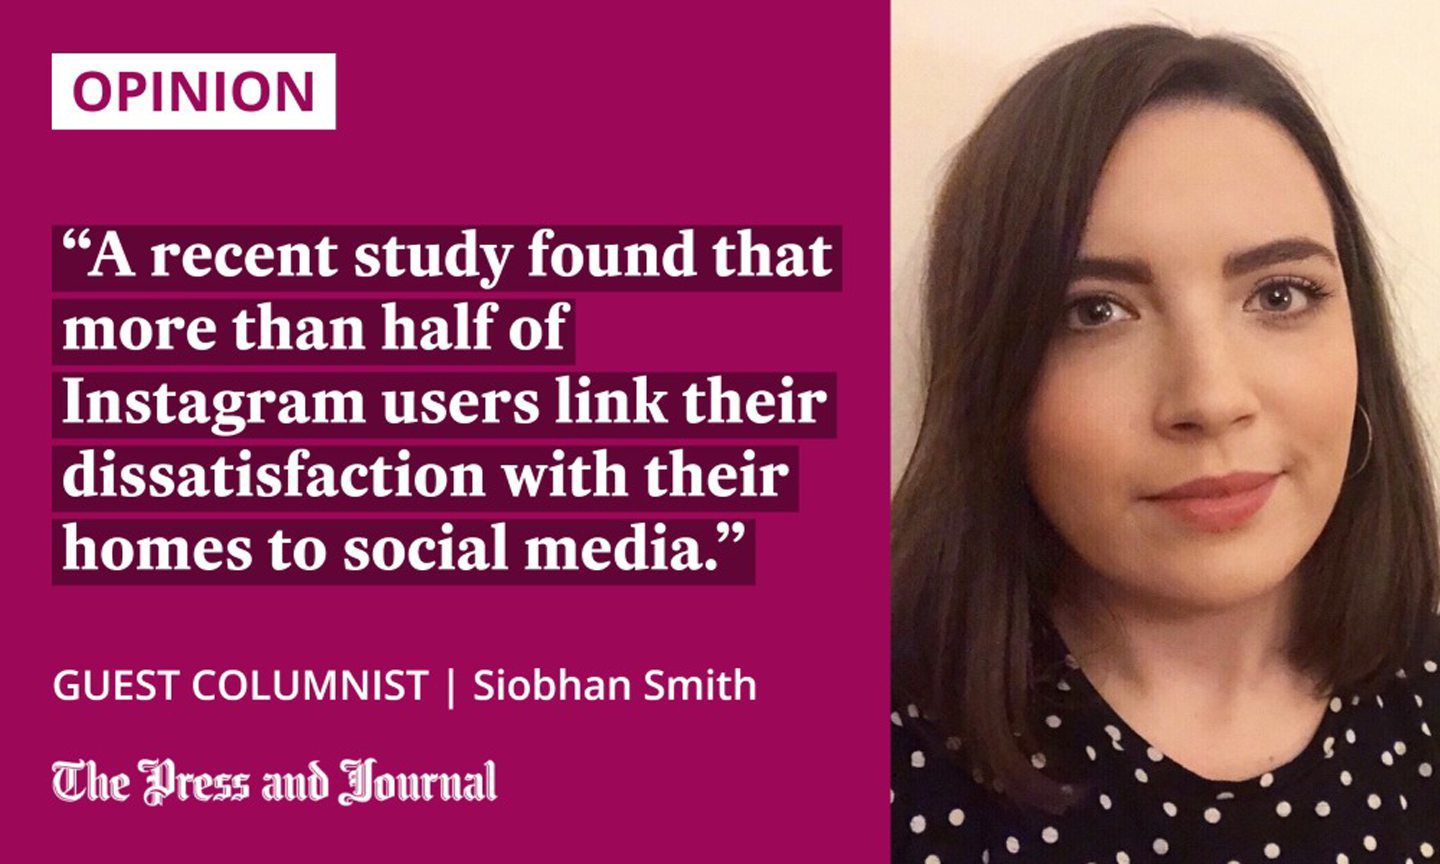 Guest columnist, Siobhan Smith speaks about Instagram, "a recent study found that more than half of Instagram users link their dissatisfaction with their homes to social media."